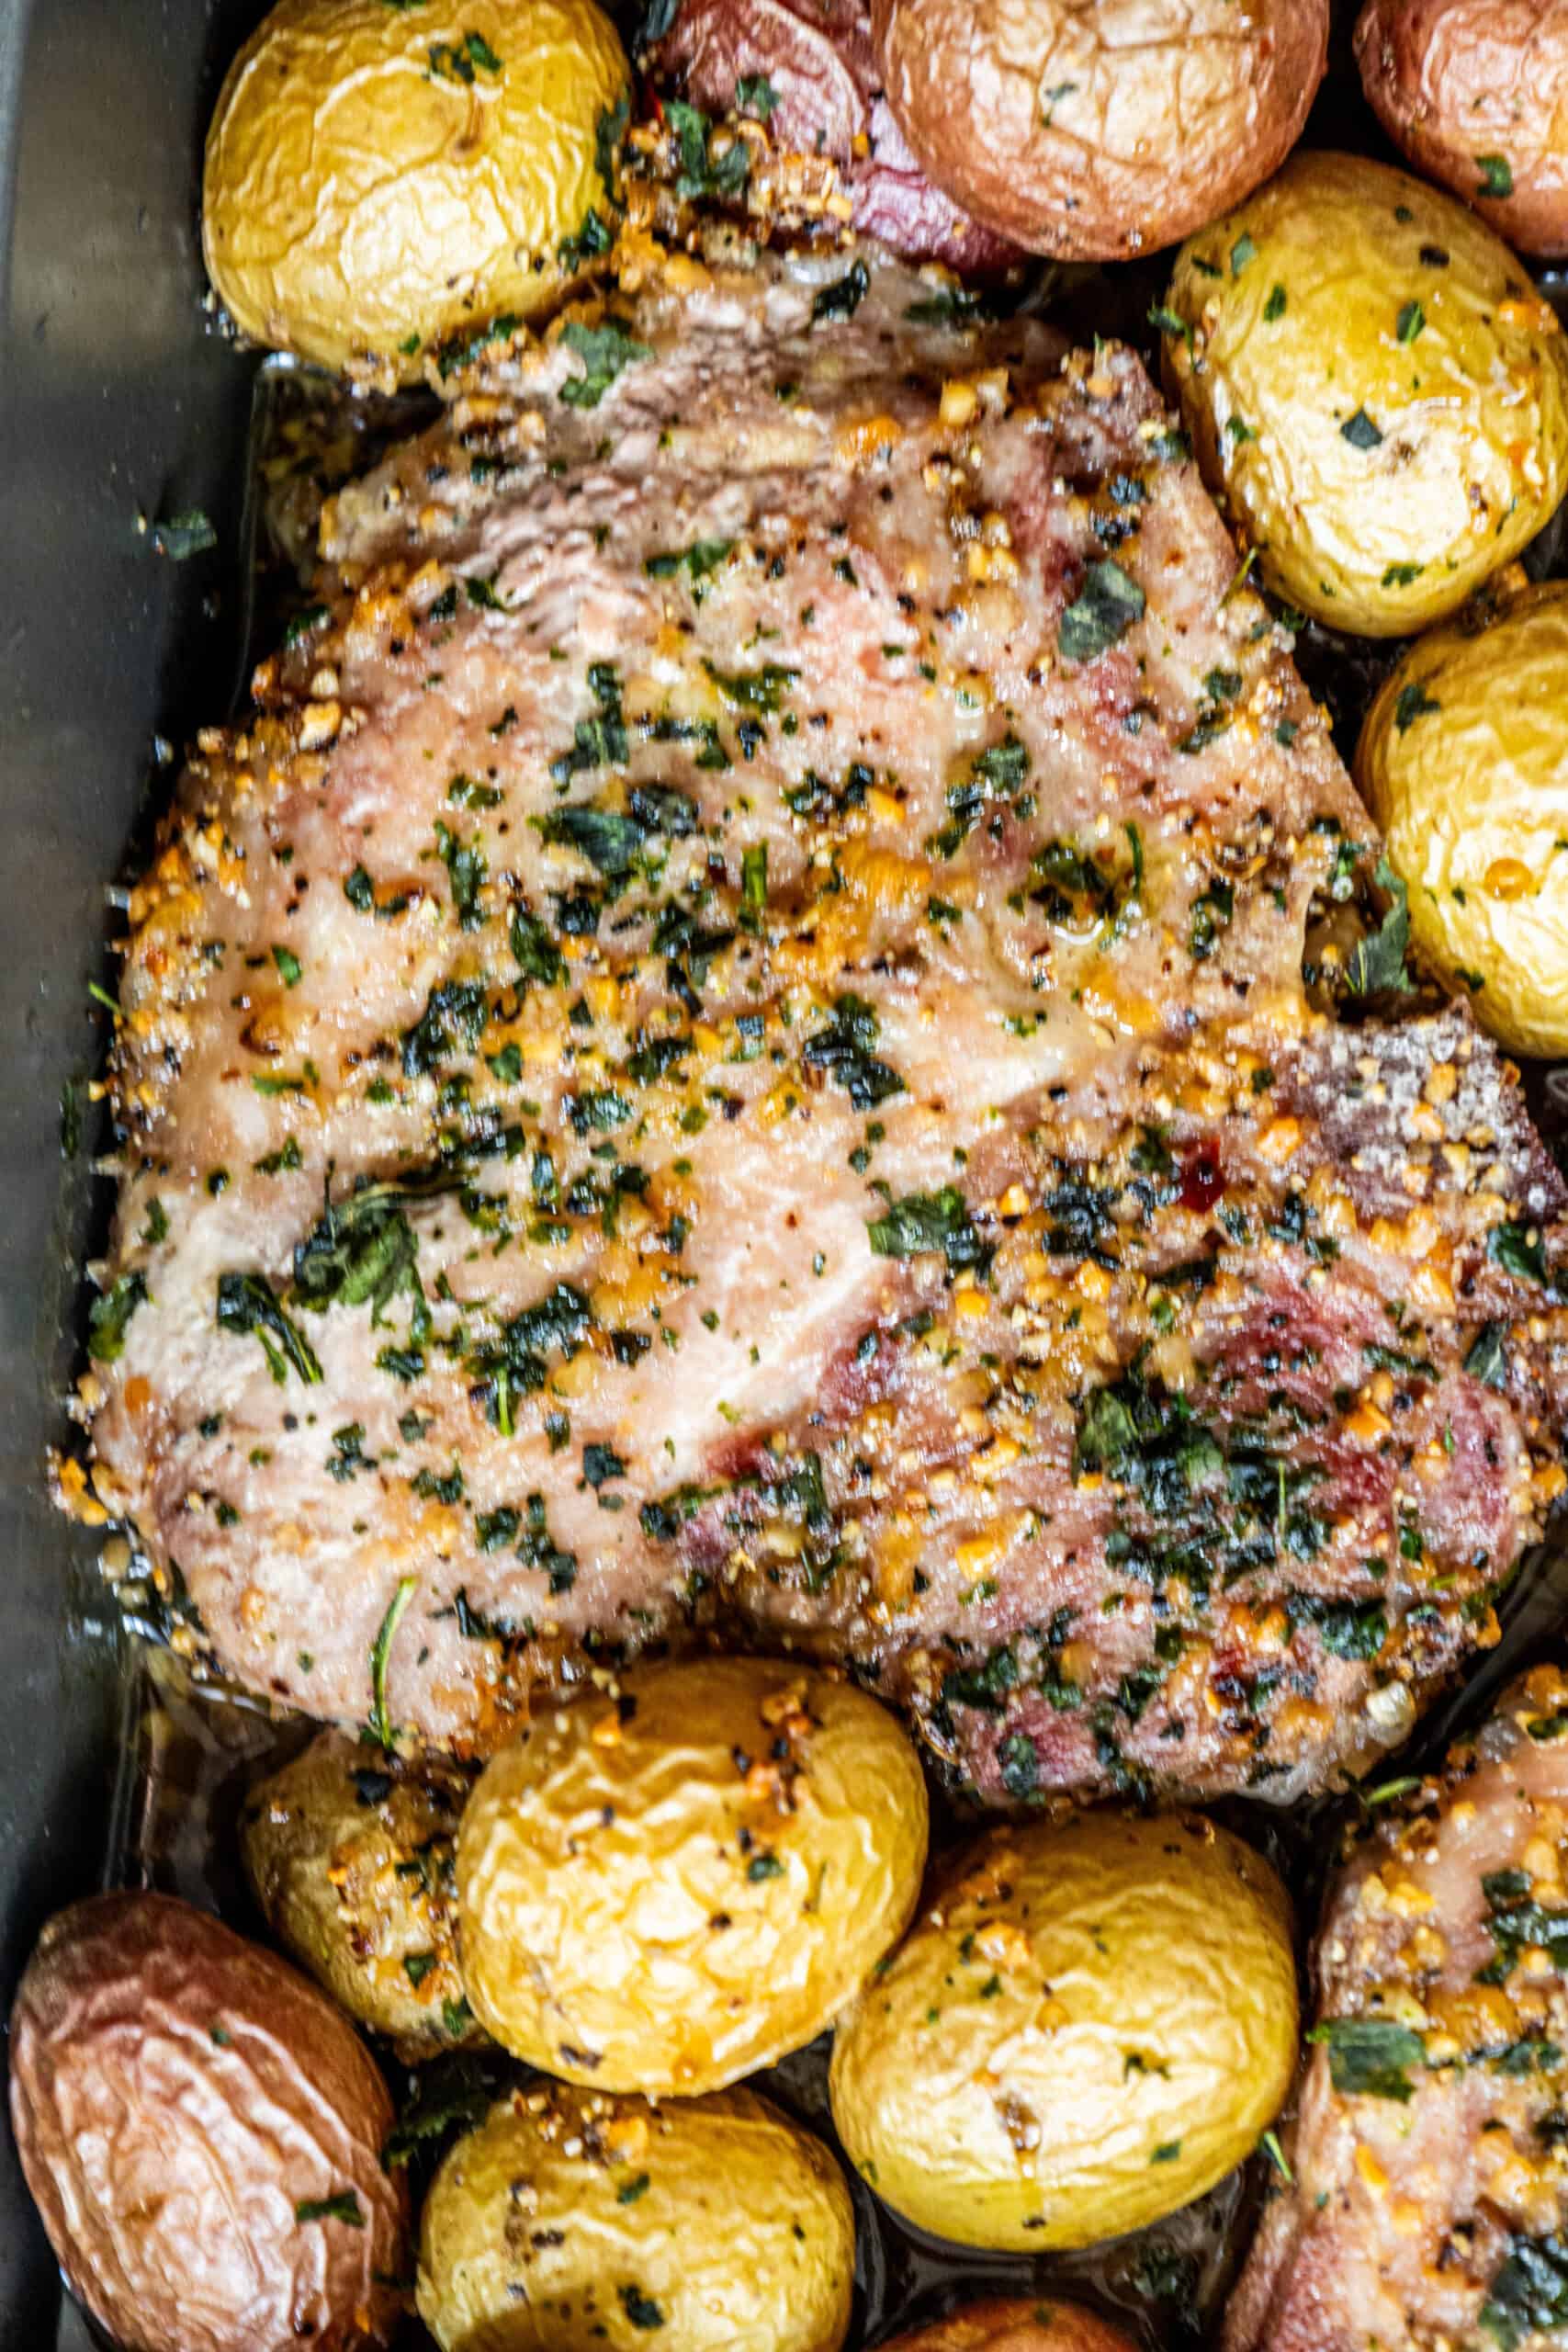 Pork chops with potatoes and herbs cooked in a baking dish.